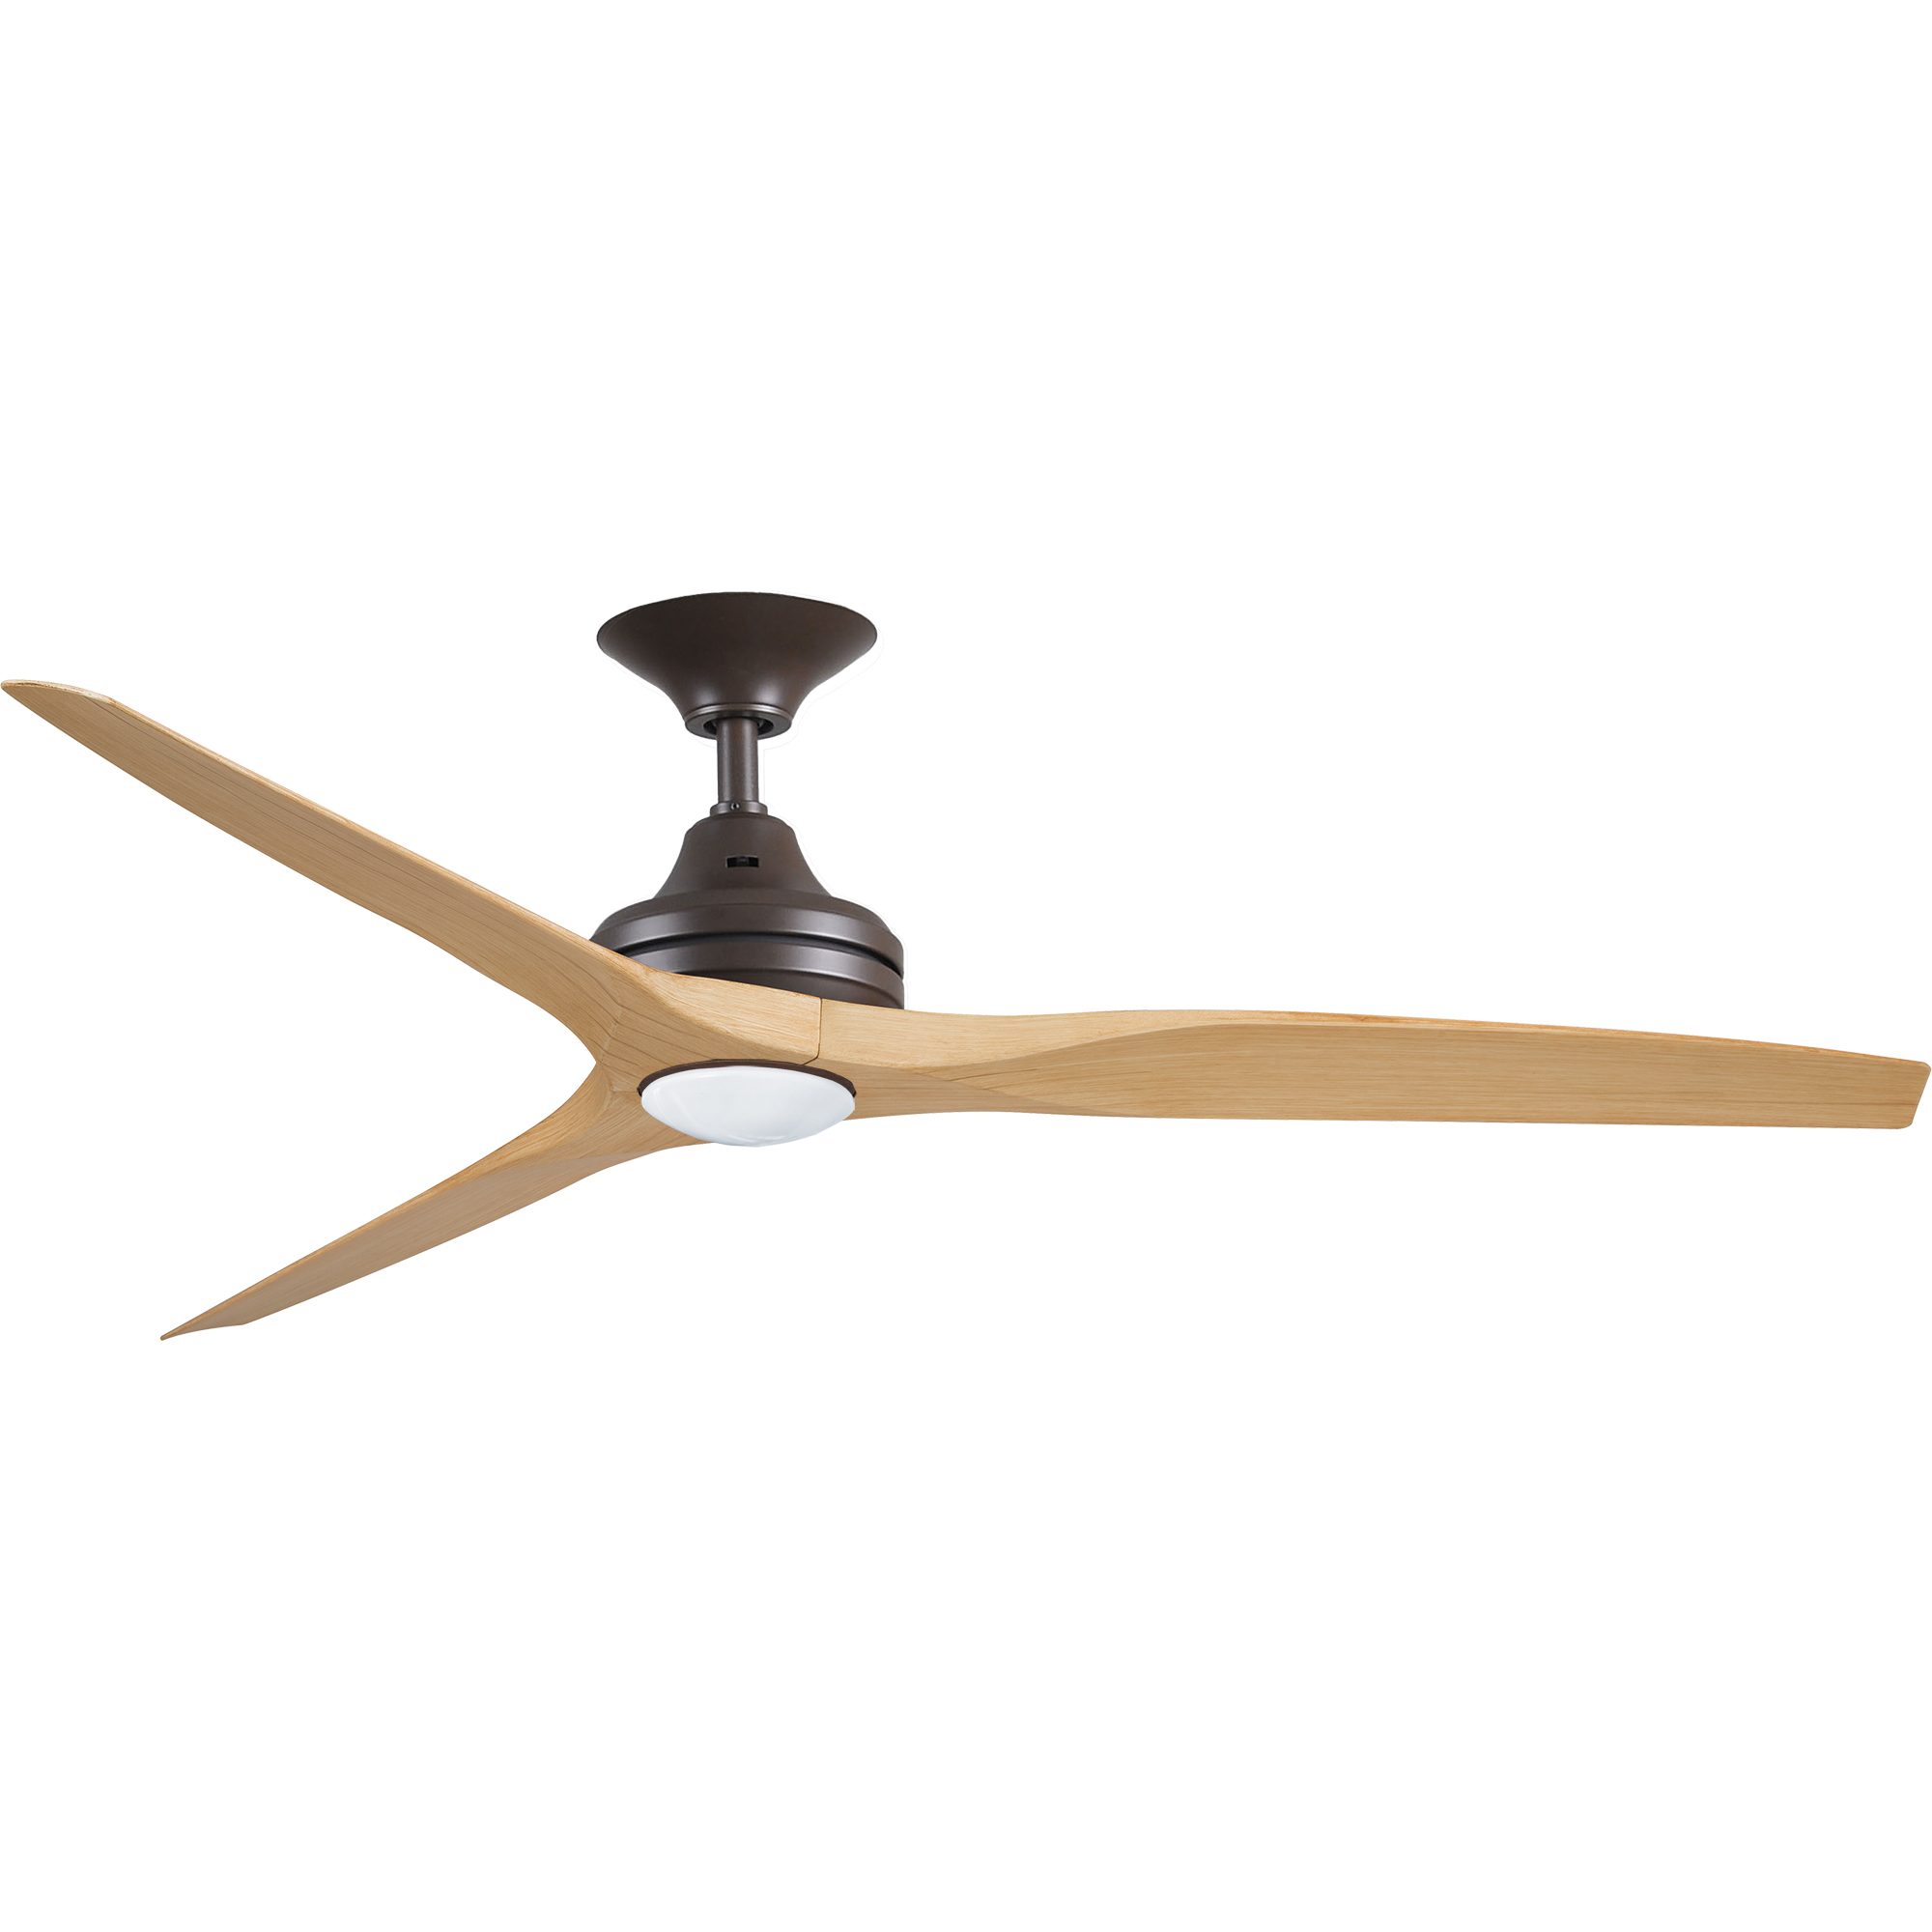 60" Spitfire ceiling fan in Oil-rubbed Bronze with Natural polymer blades and LED Light Kit